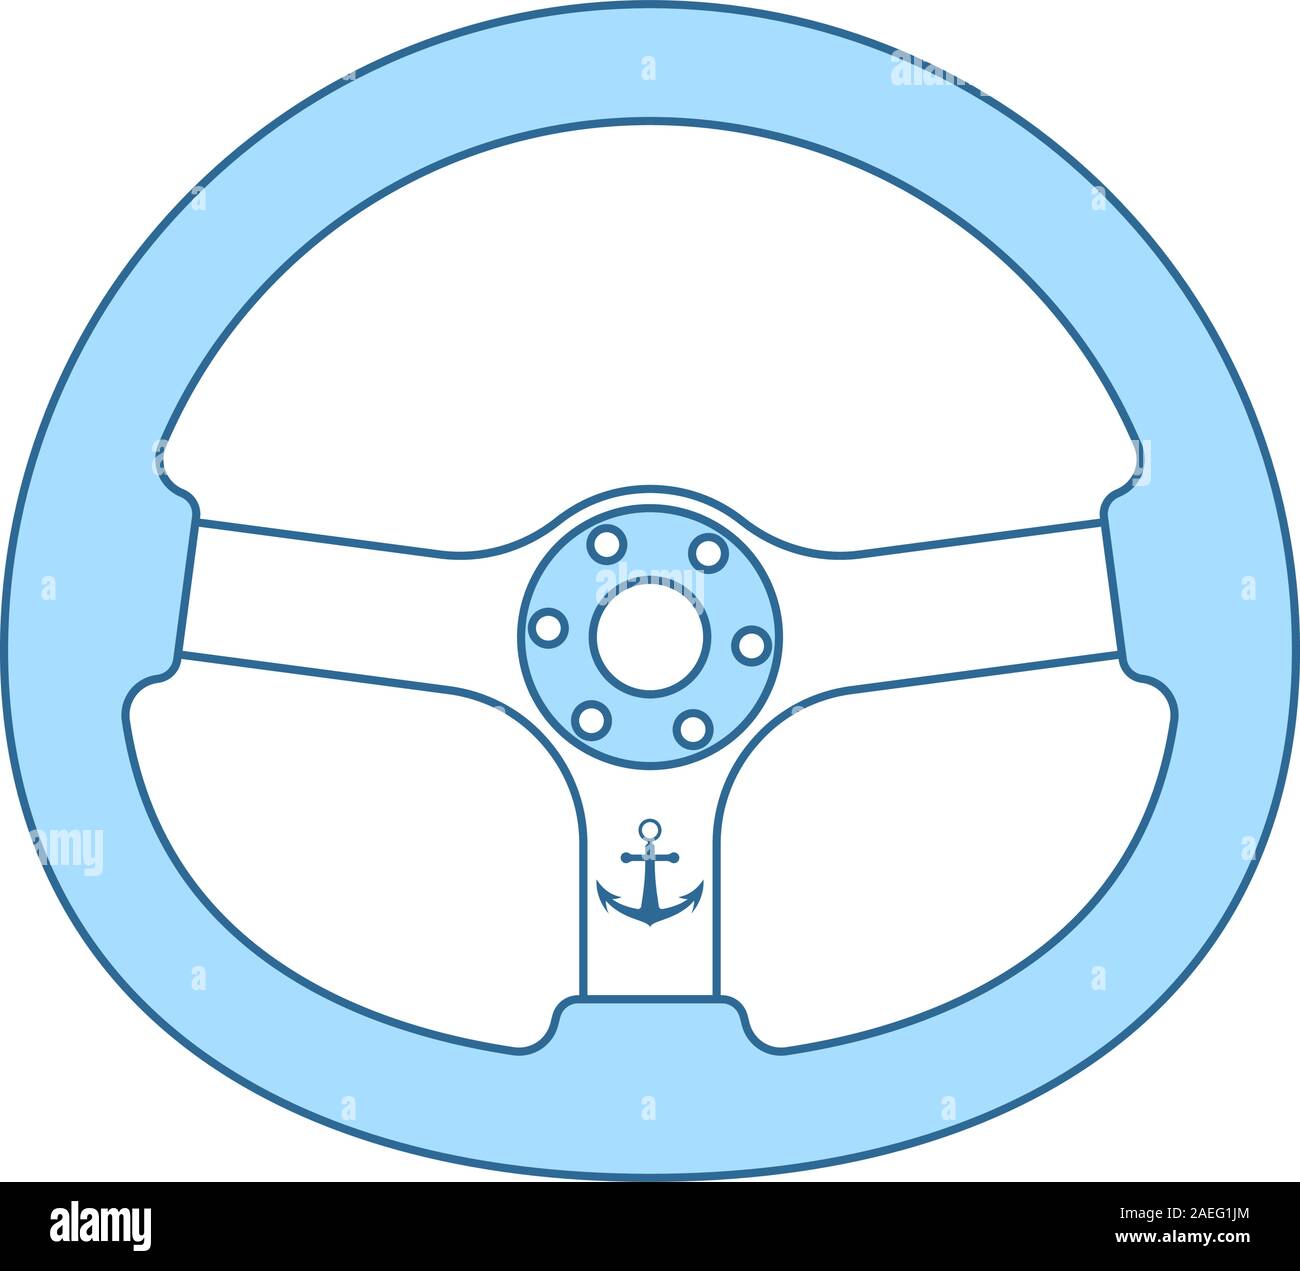 Icon Of Steering Wheel. Thin Line With Blue Fill Design. Vector Illustration. Stock Vector